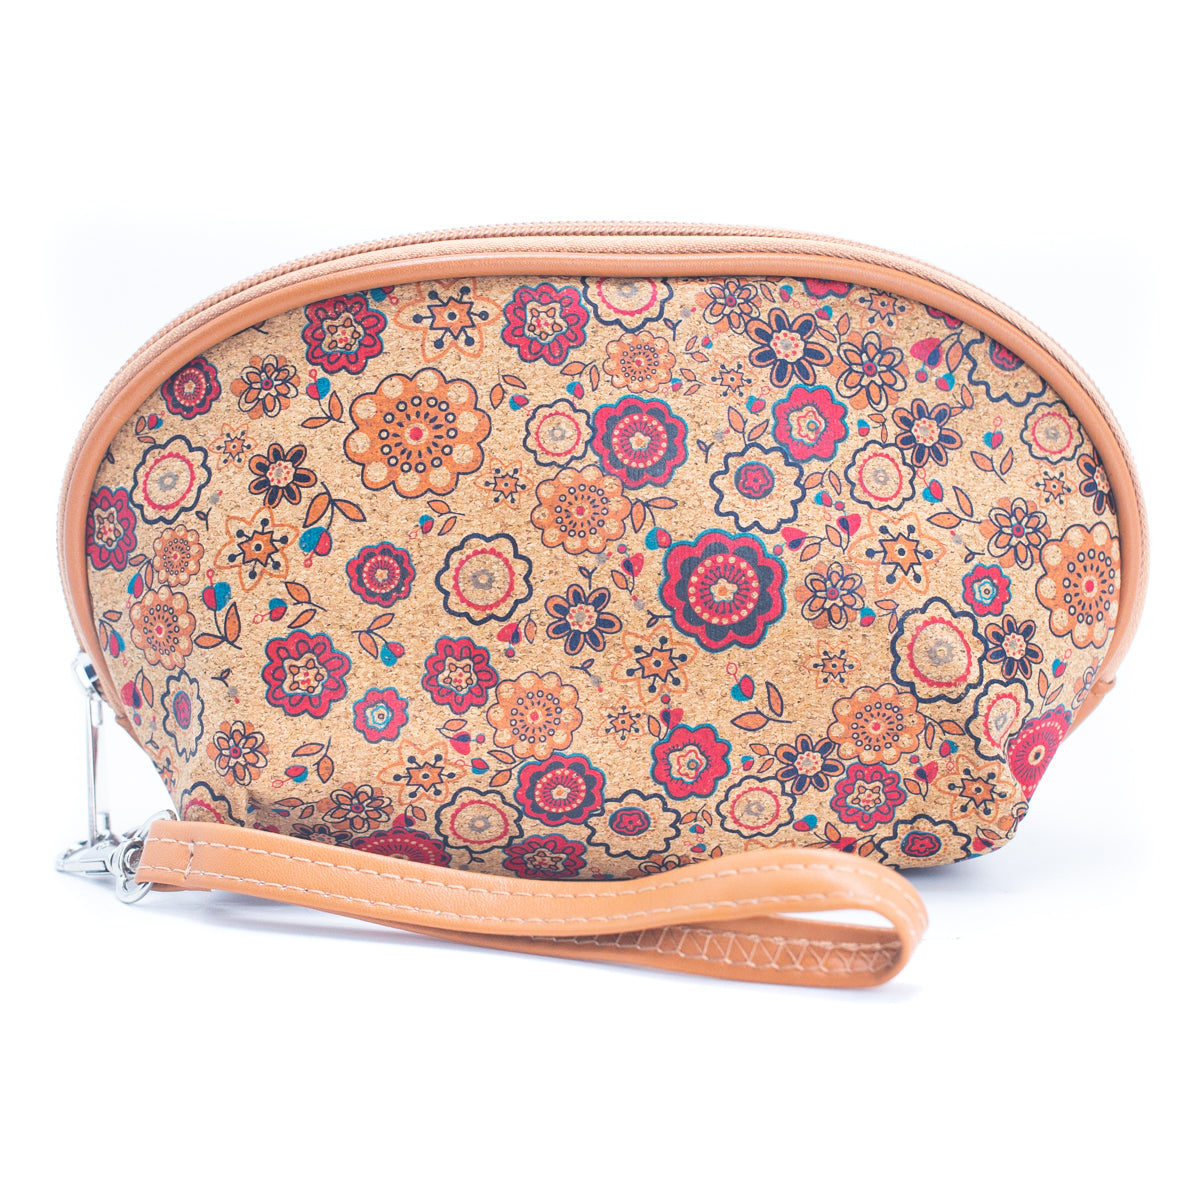 Women's Natural Cork Clutch Bag w/ Hand Strap | THE CORK COLLECTION